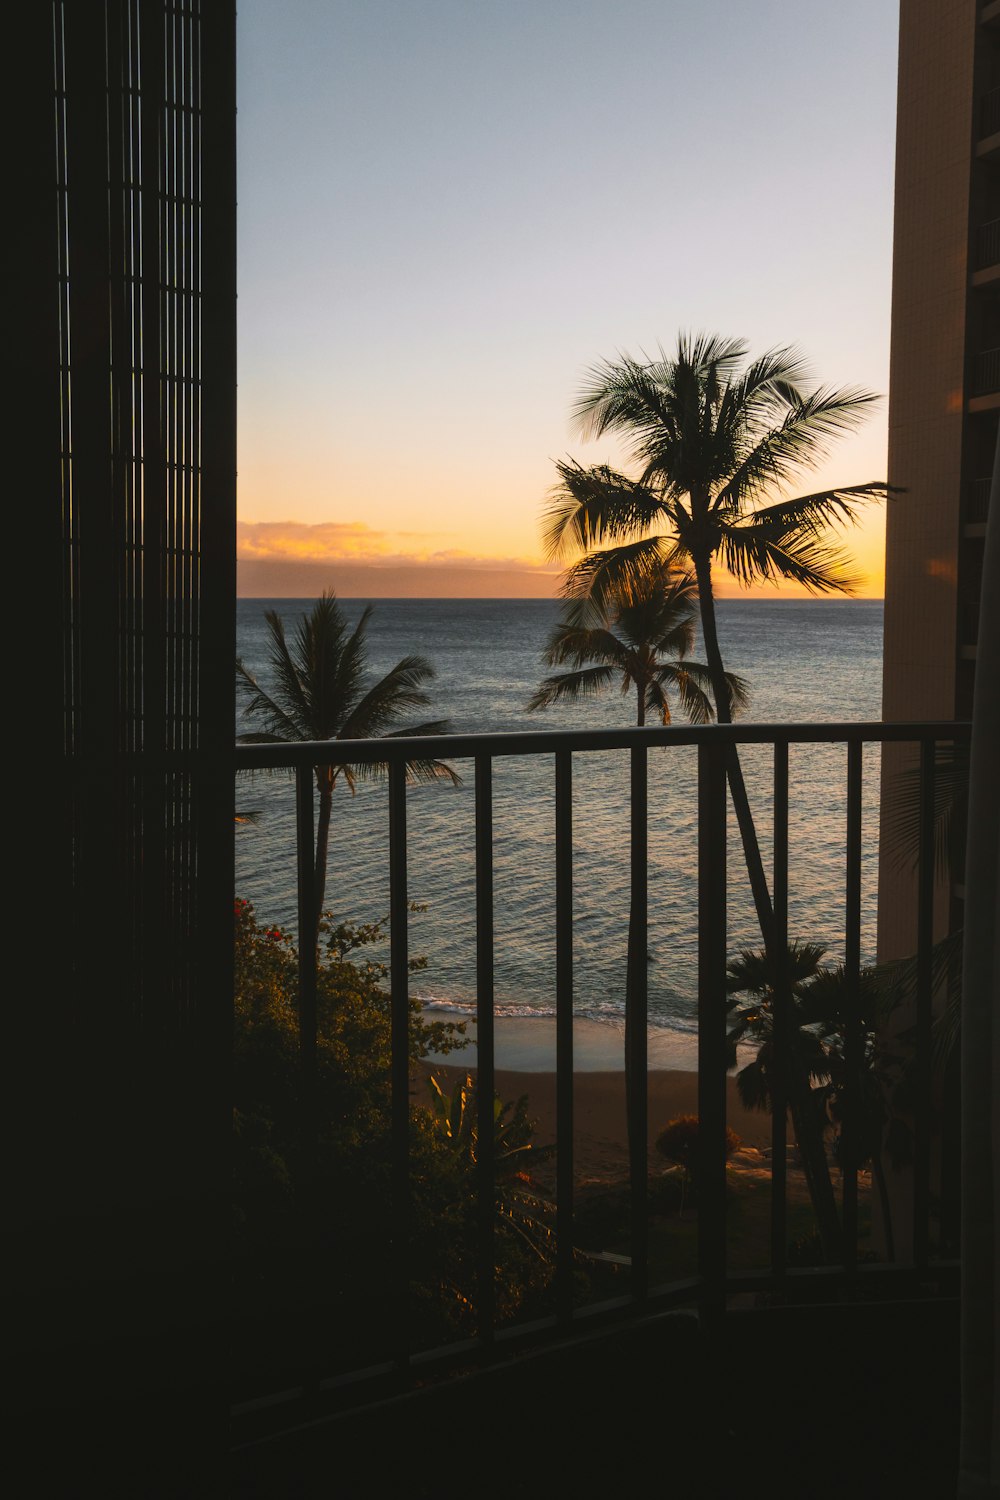 a view of the ocean from a balcony at sunset